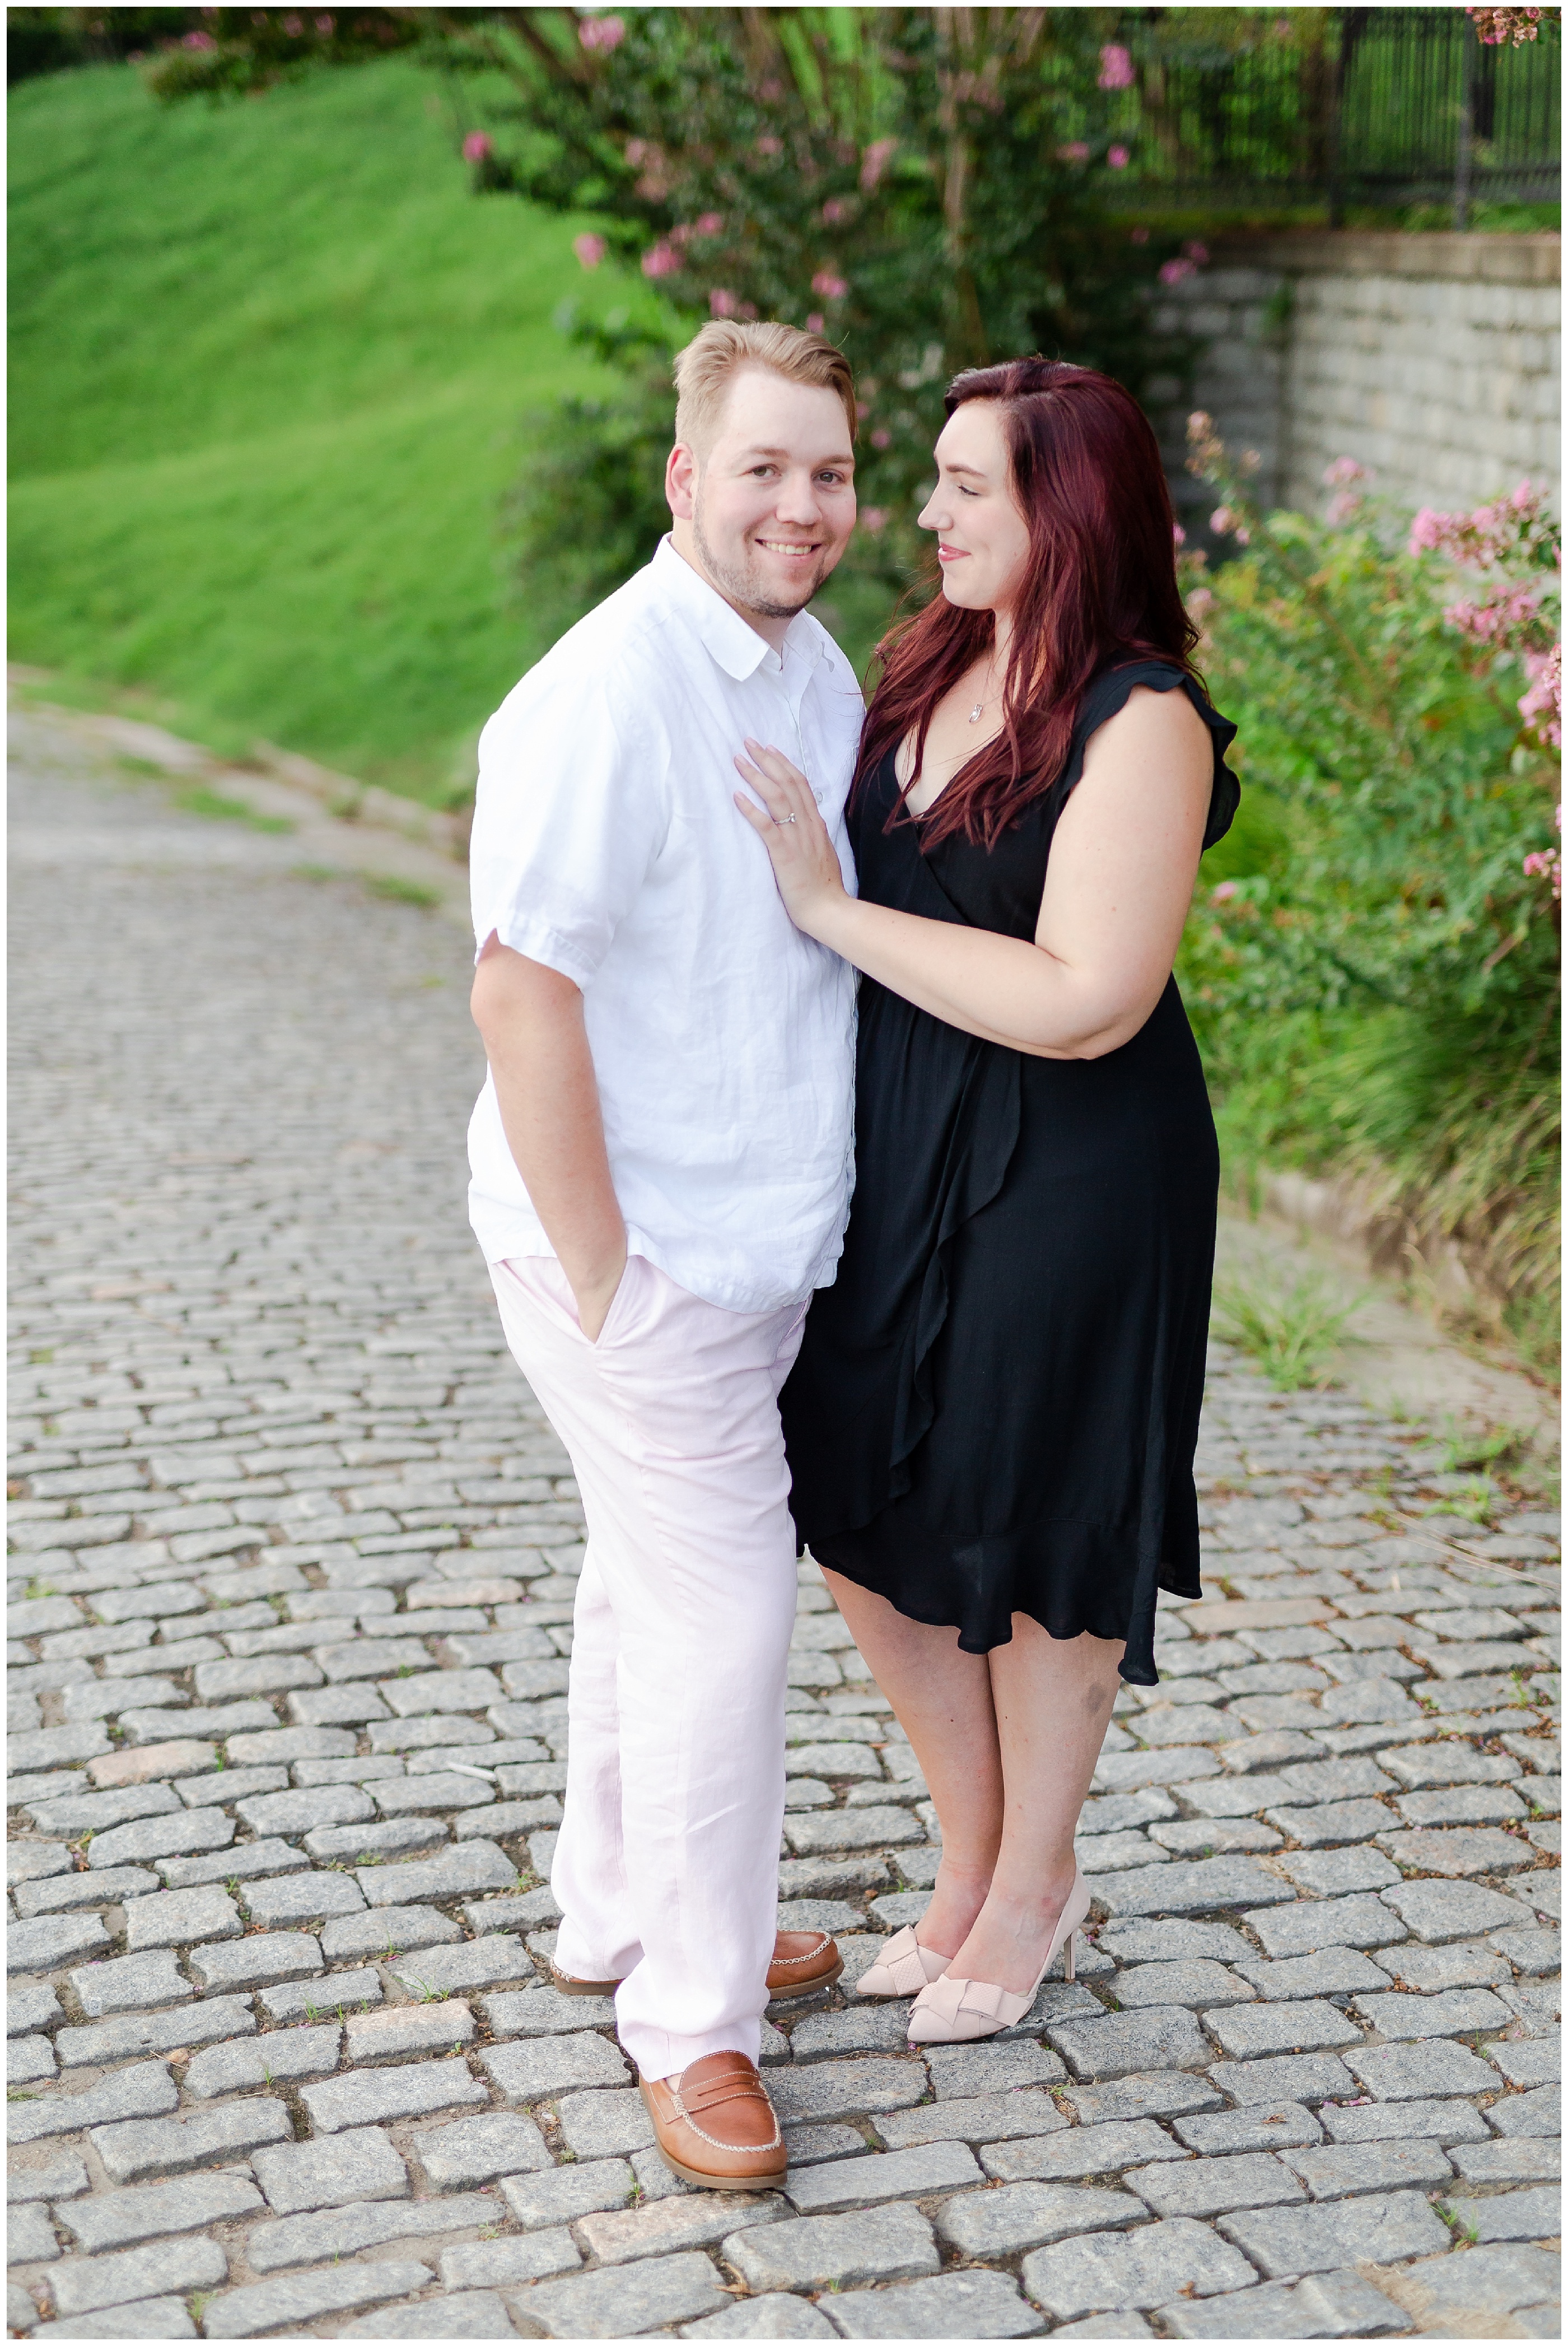 Libby Hill Park engagement session Richmond Virginia Photographers Luke and Ashley Photography 